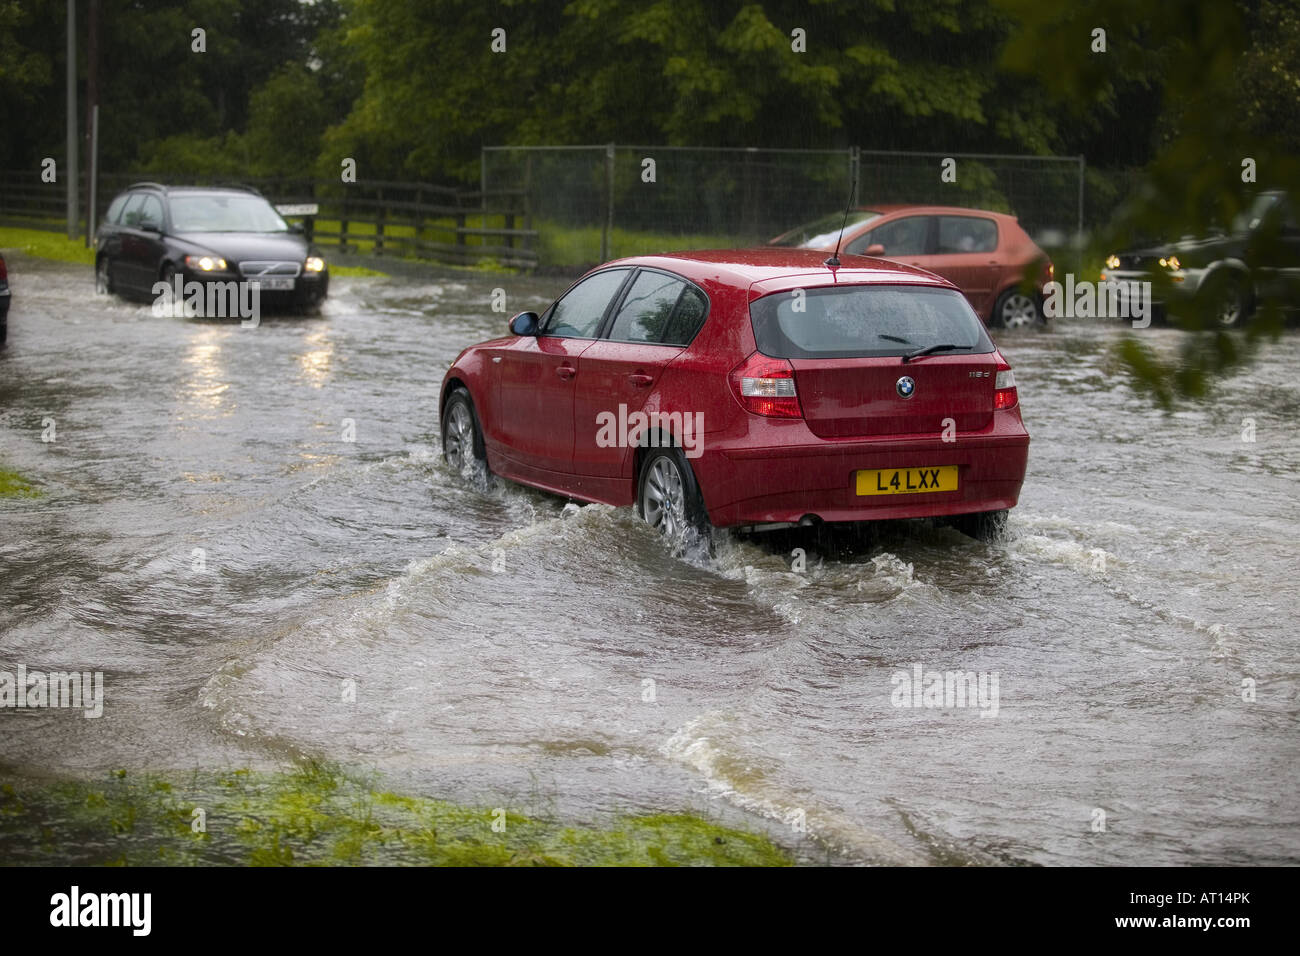 flooding in hull followed a weekend of high temperatures across the UK, cars pushing water from the roads into nearby gardens. Stock Photo